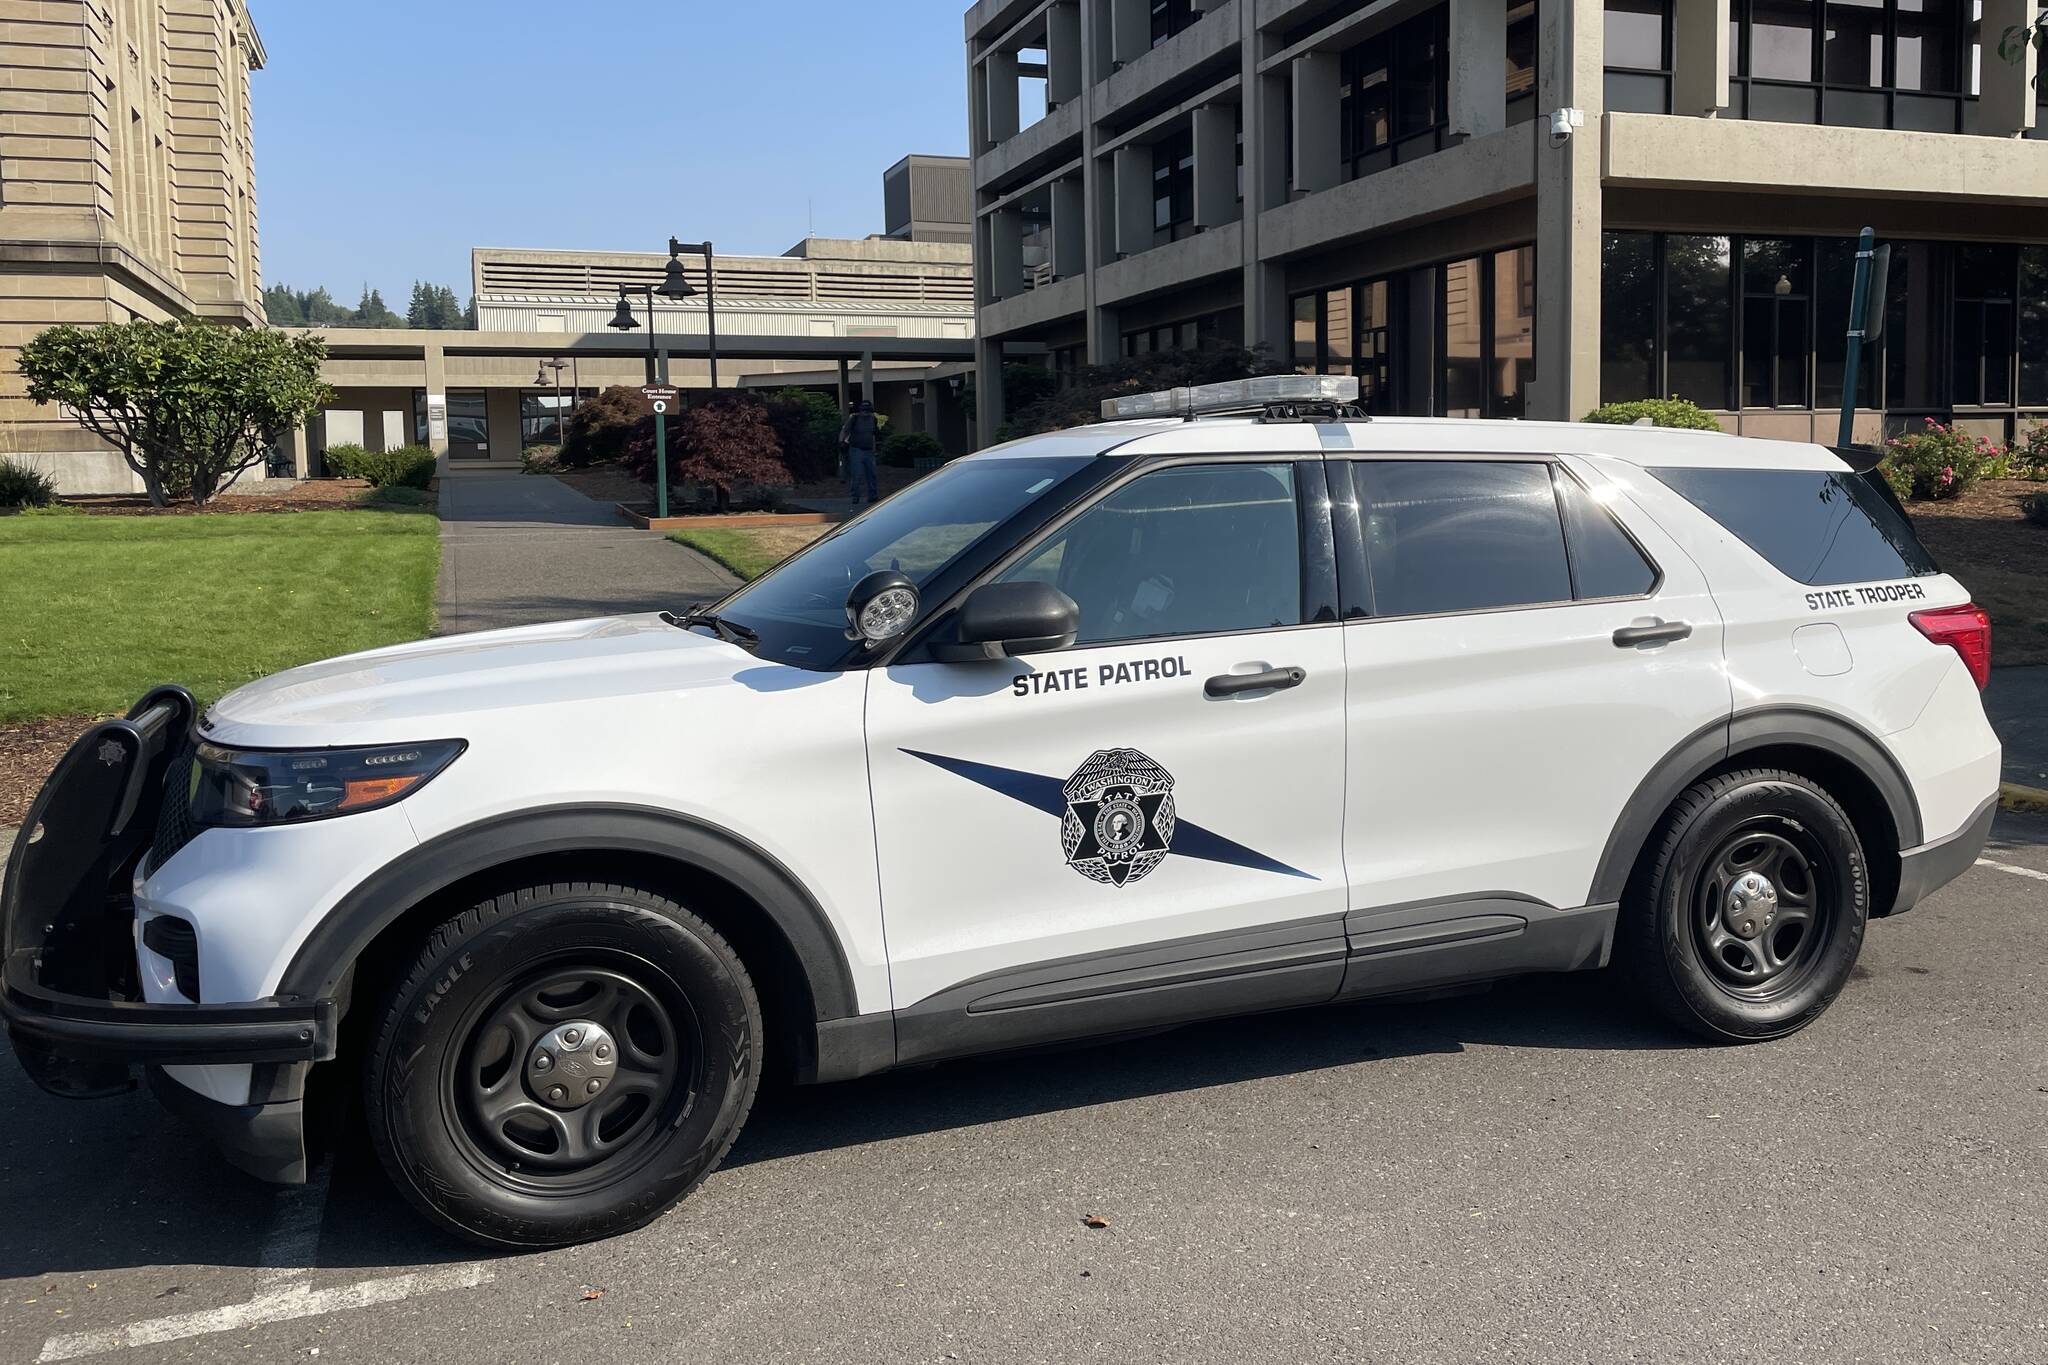 (Michael S. Lockett | The Daily World)
                                A 21-year-old man was killed in a single-vehicle incident on Saturday, according to the Washington State Patrol.